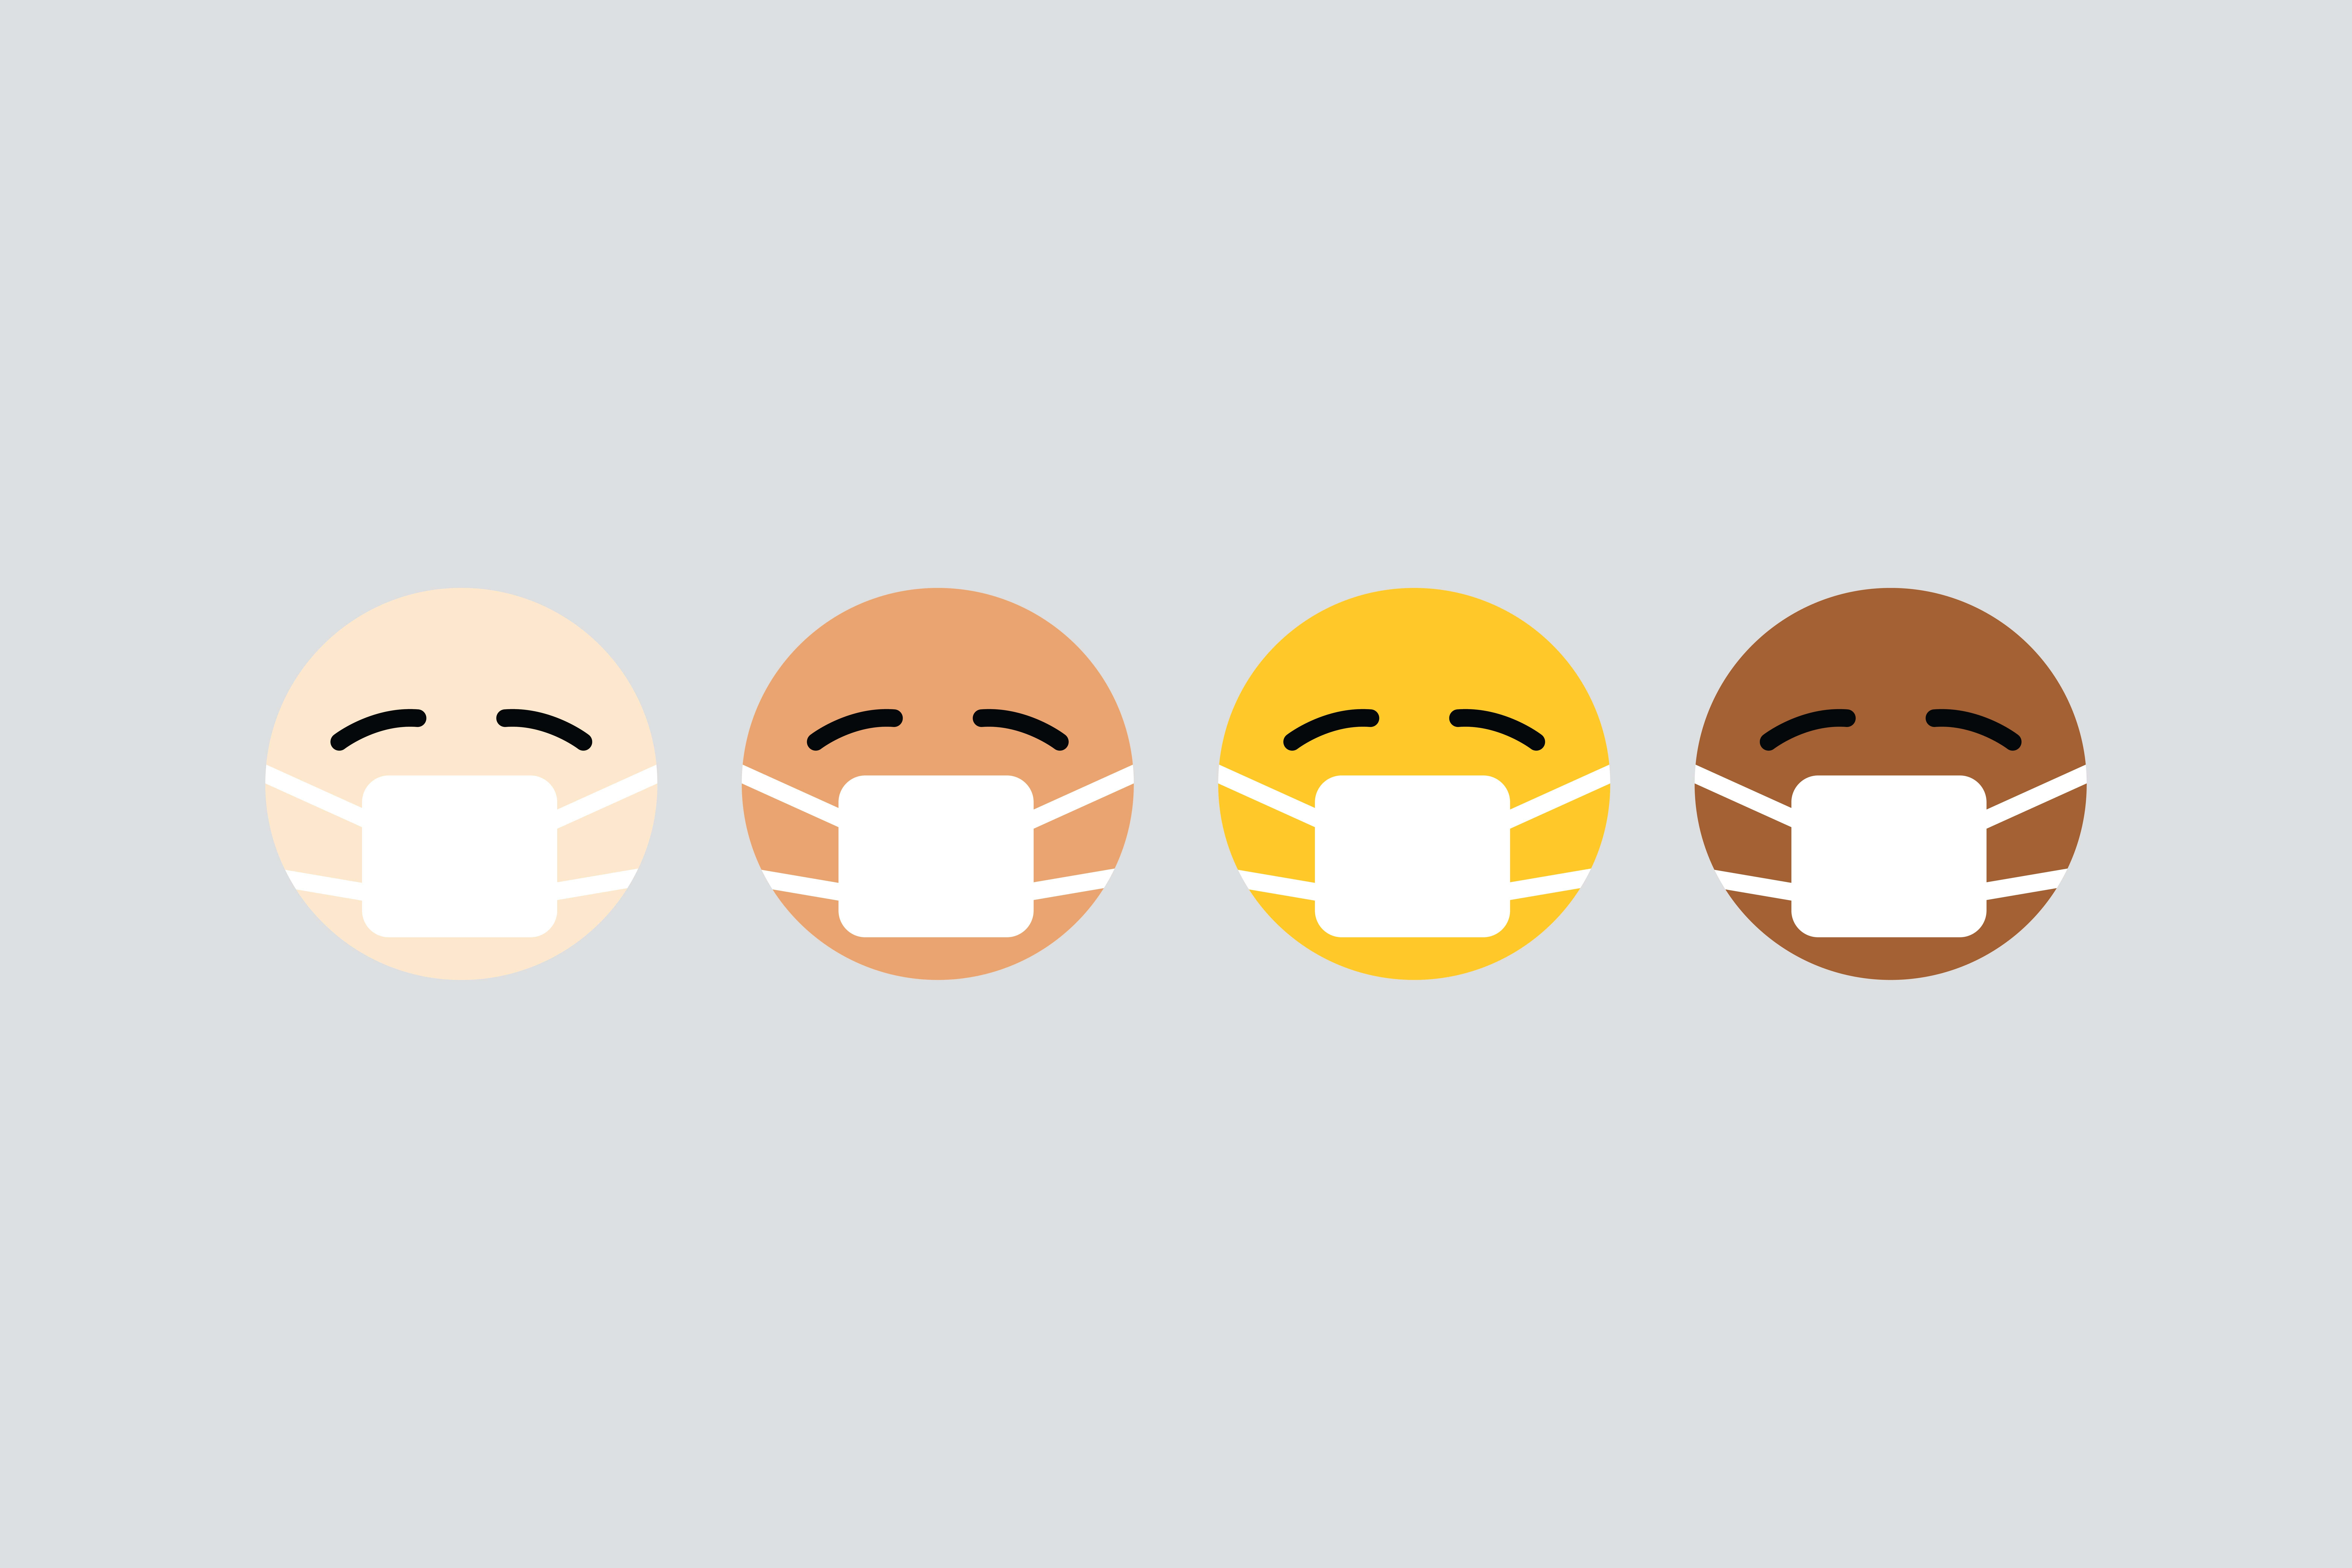 Four cartoon faces, similar to a smiley face, are shown in a line. Each face is a different skin tone and they are all wearing masks over their mouth and noses, like those worn to prevent the spread of COVID-19.